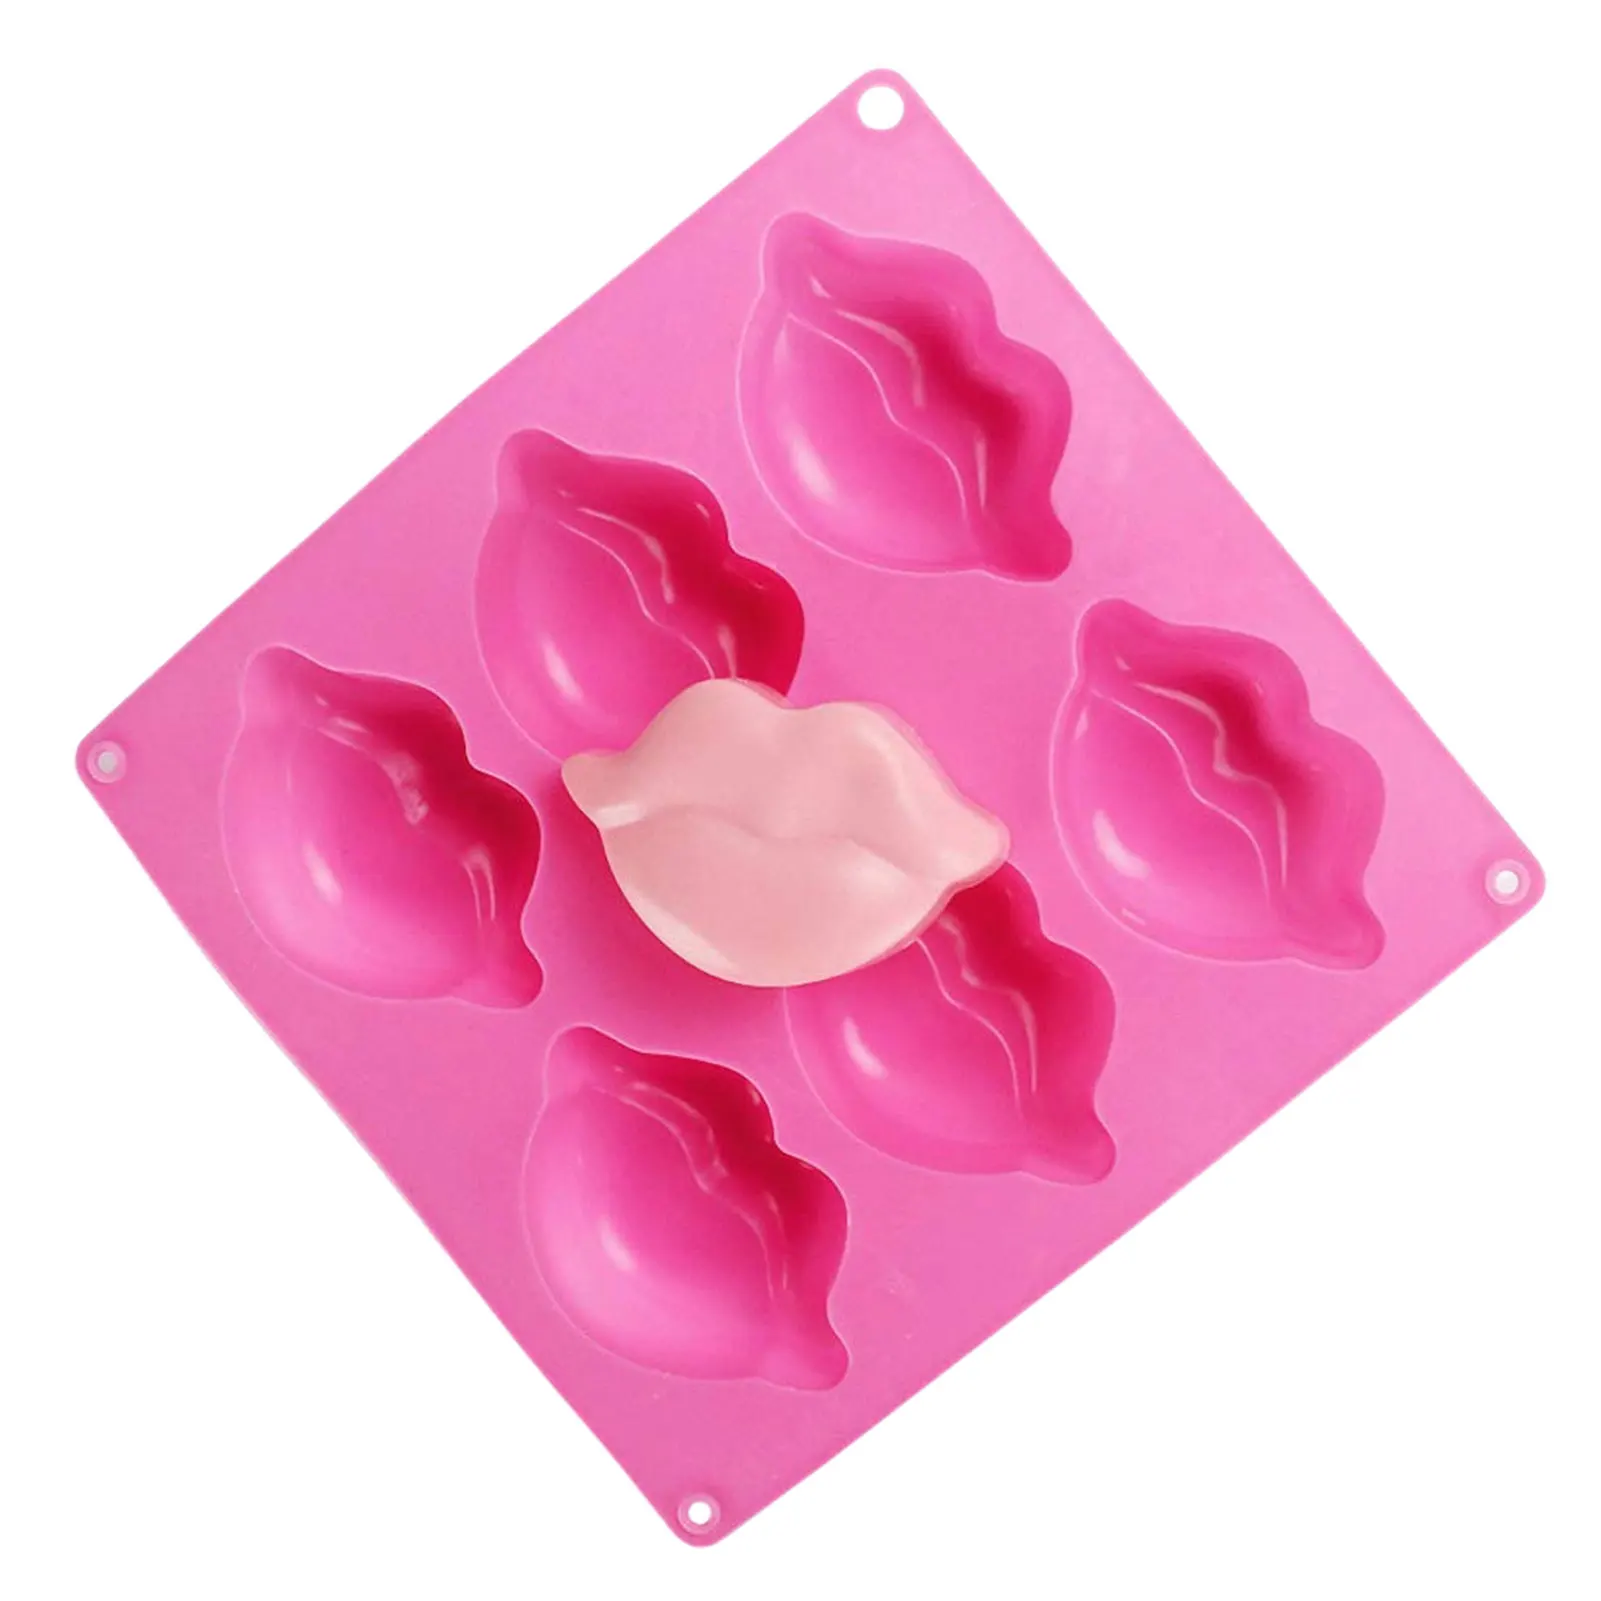 

Silicone Chocolate Moulds 6 Cavity Food Grade Non-Stick Cake Mold 3D Lip Shaped Multipurpose For Candy Cake Soap Jelly Cookie